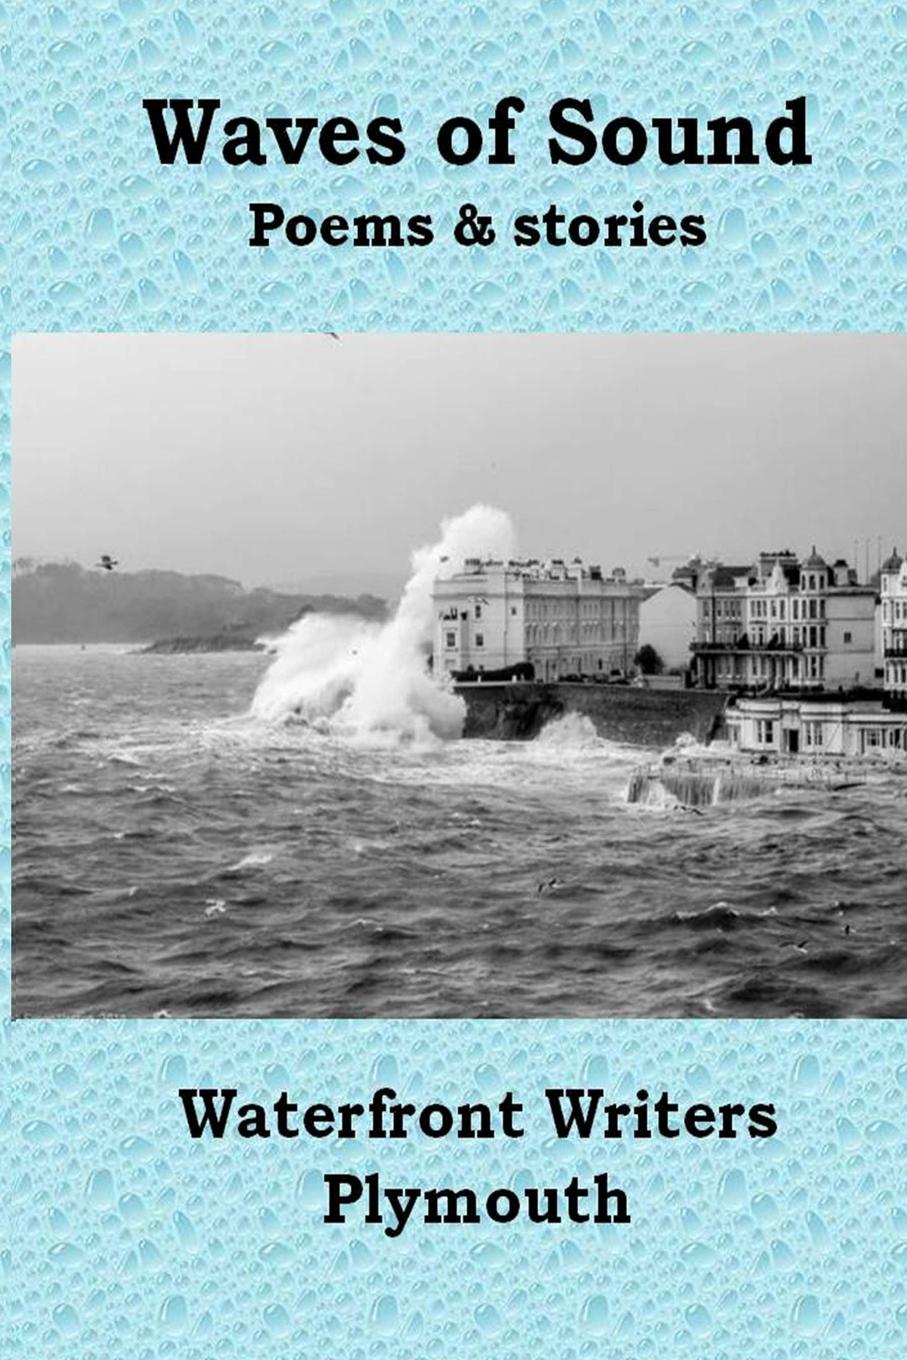 Waterfront Writers Plymouth The Waves Of Sound